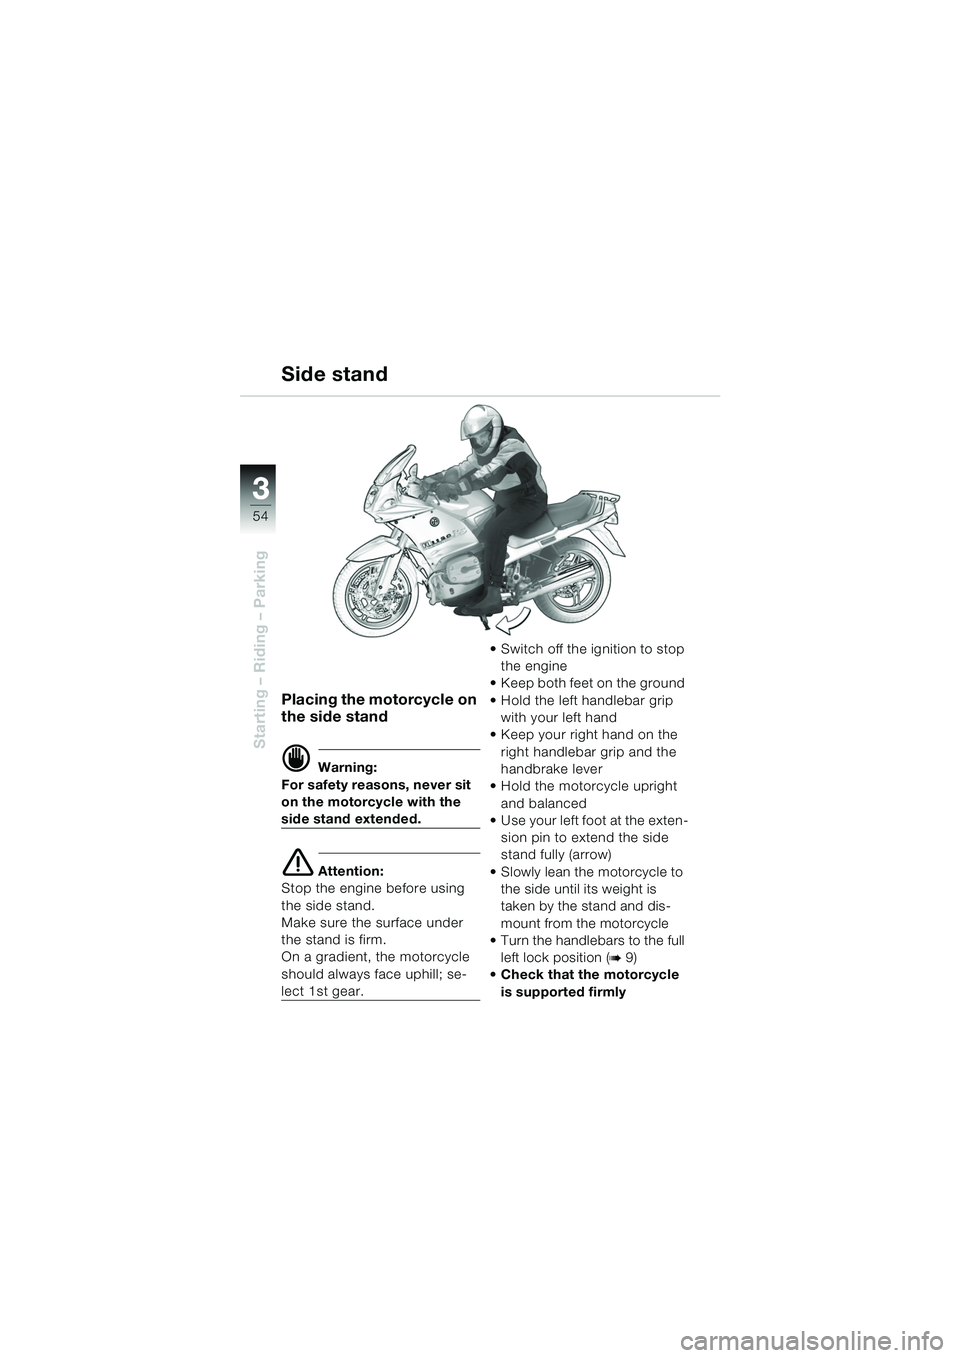 BMW MOTORRAD R 1150 RS 2002  Riders Manual (in English) 33
54
Starting – Riding – Parking
Placing the motorcycle on 
the side stand
d Warning:
For safety reasons, never sit 
on the motorcycle with the 
side stand extended.
e Attention:
Stop the engine 